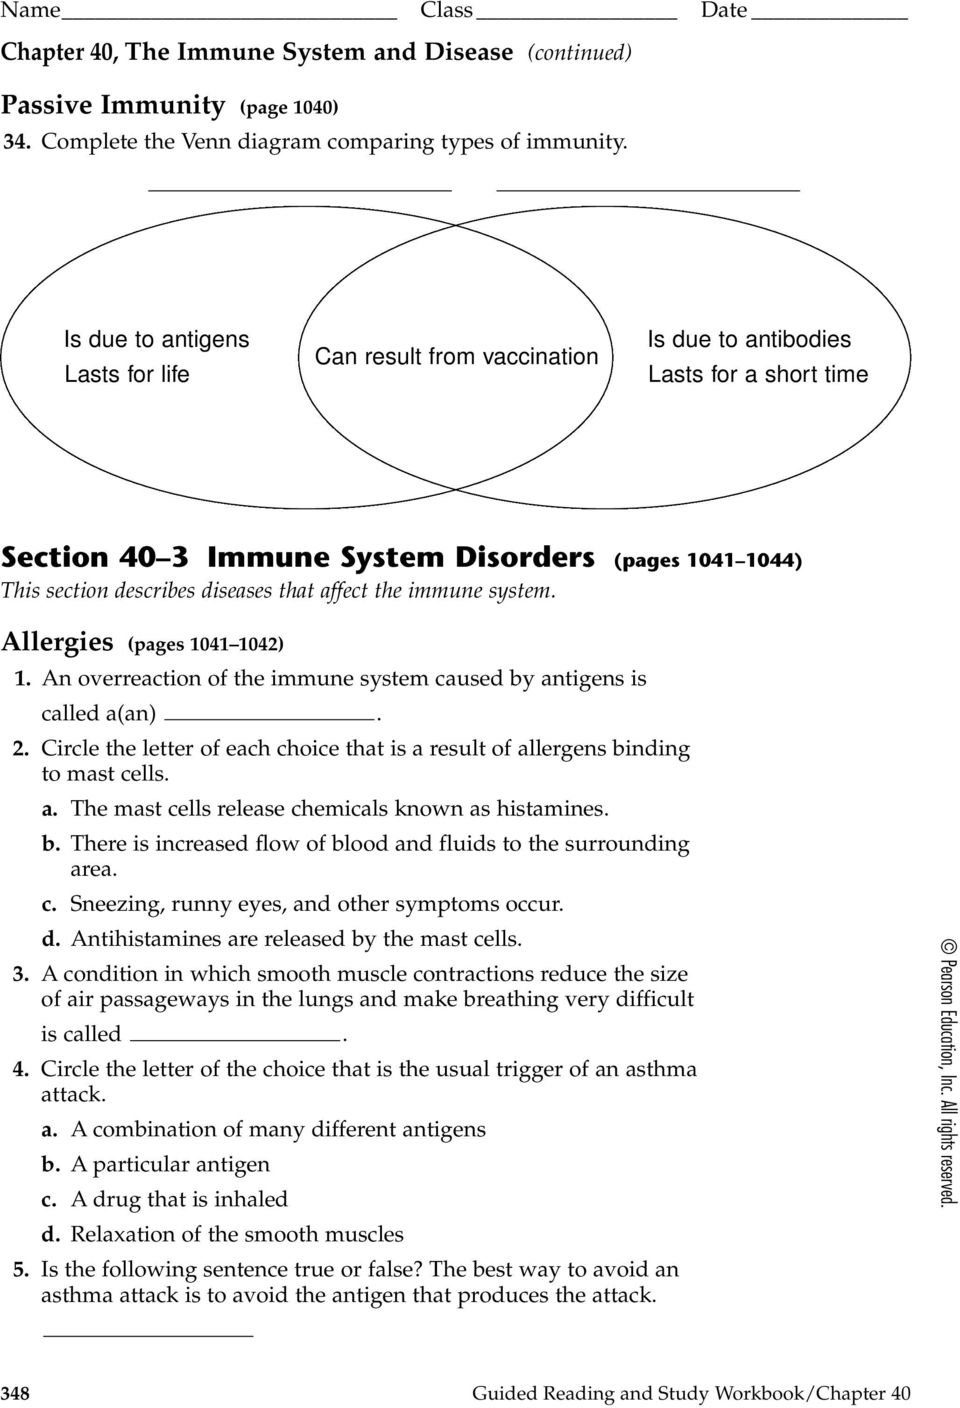 The Immune System And Disease  Pdf Within Chapter 24 The Immune System And Disease Worksheet Answer Key